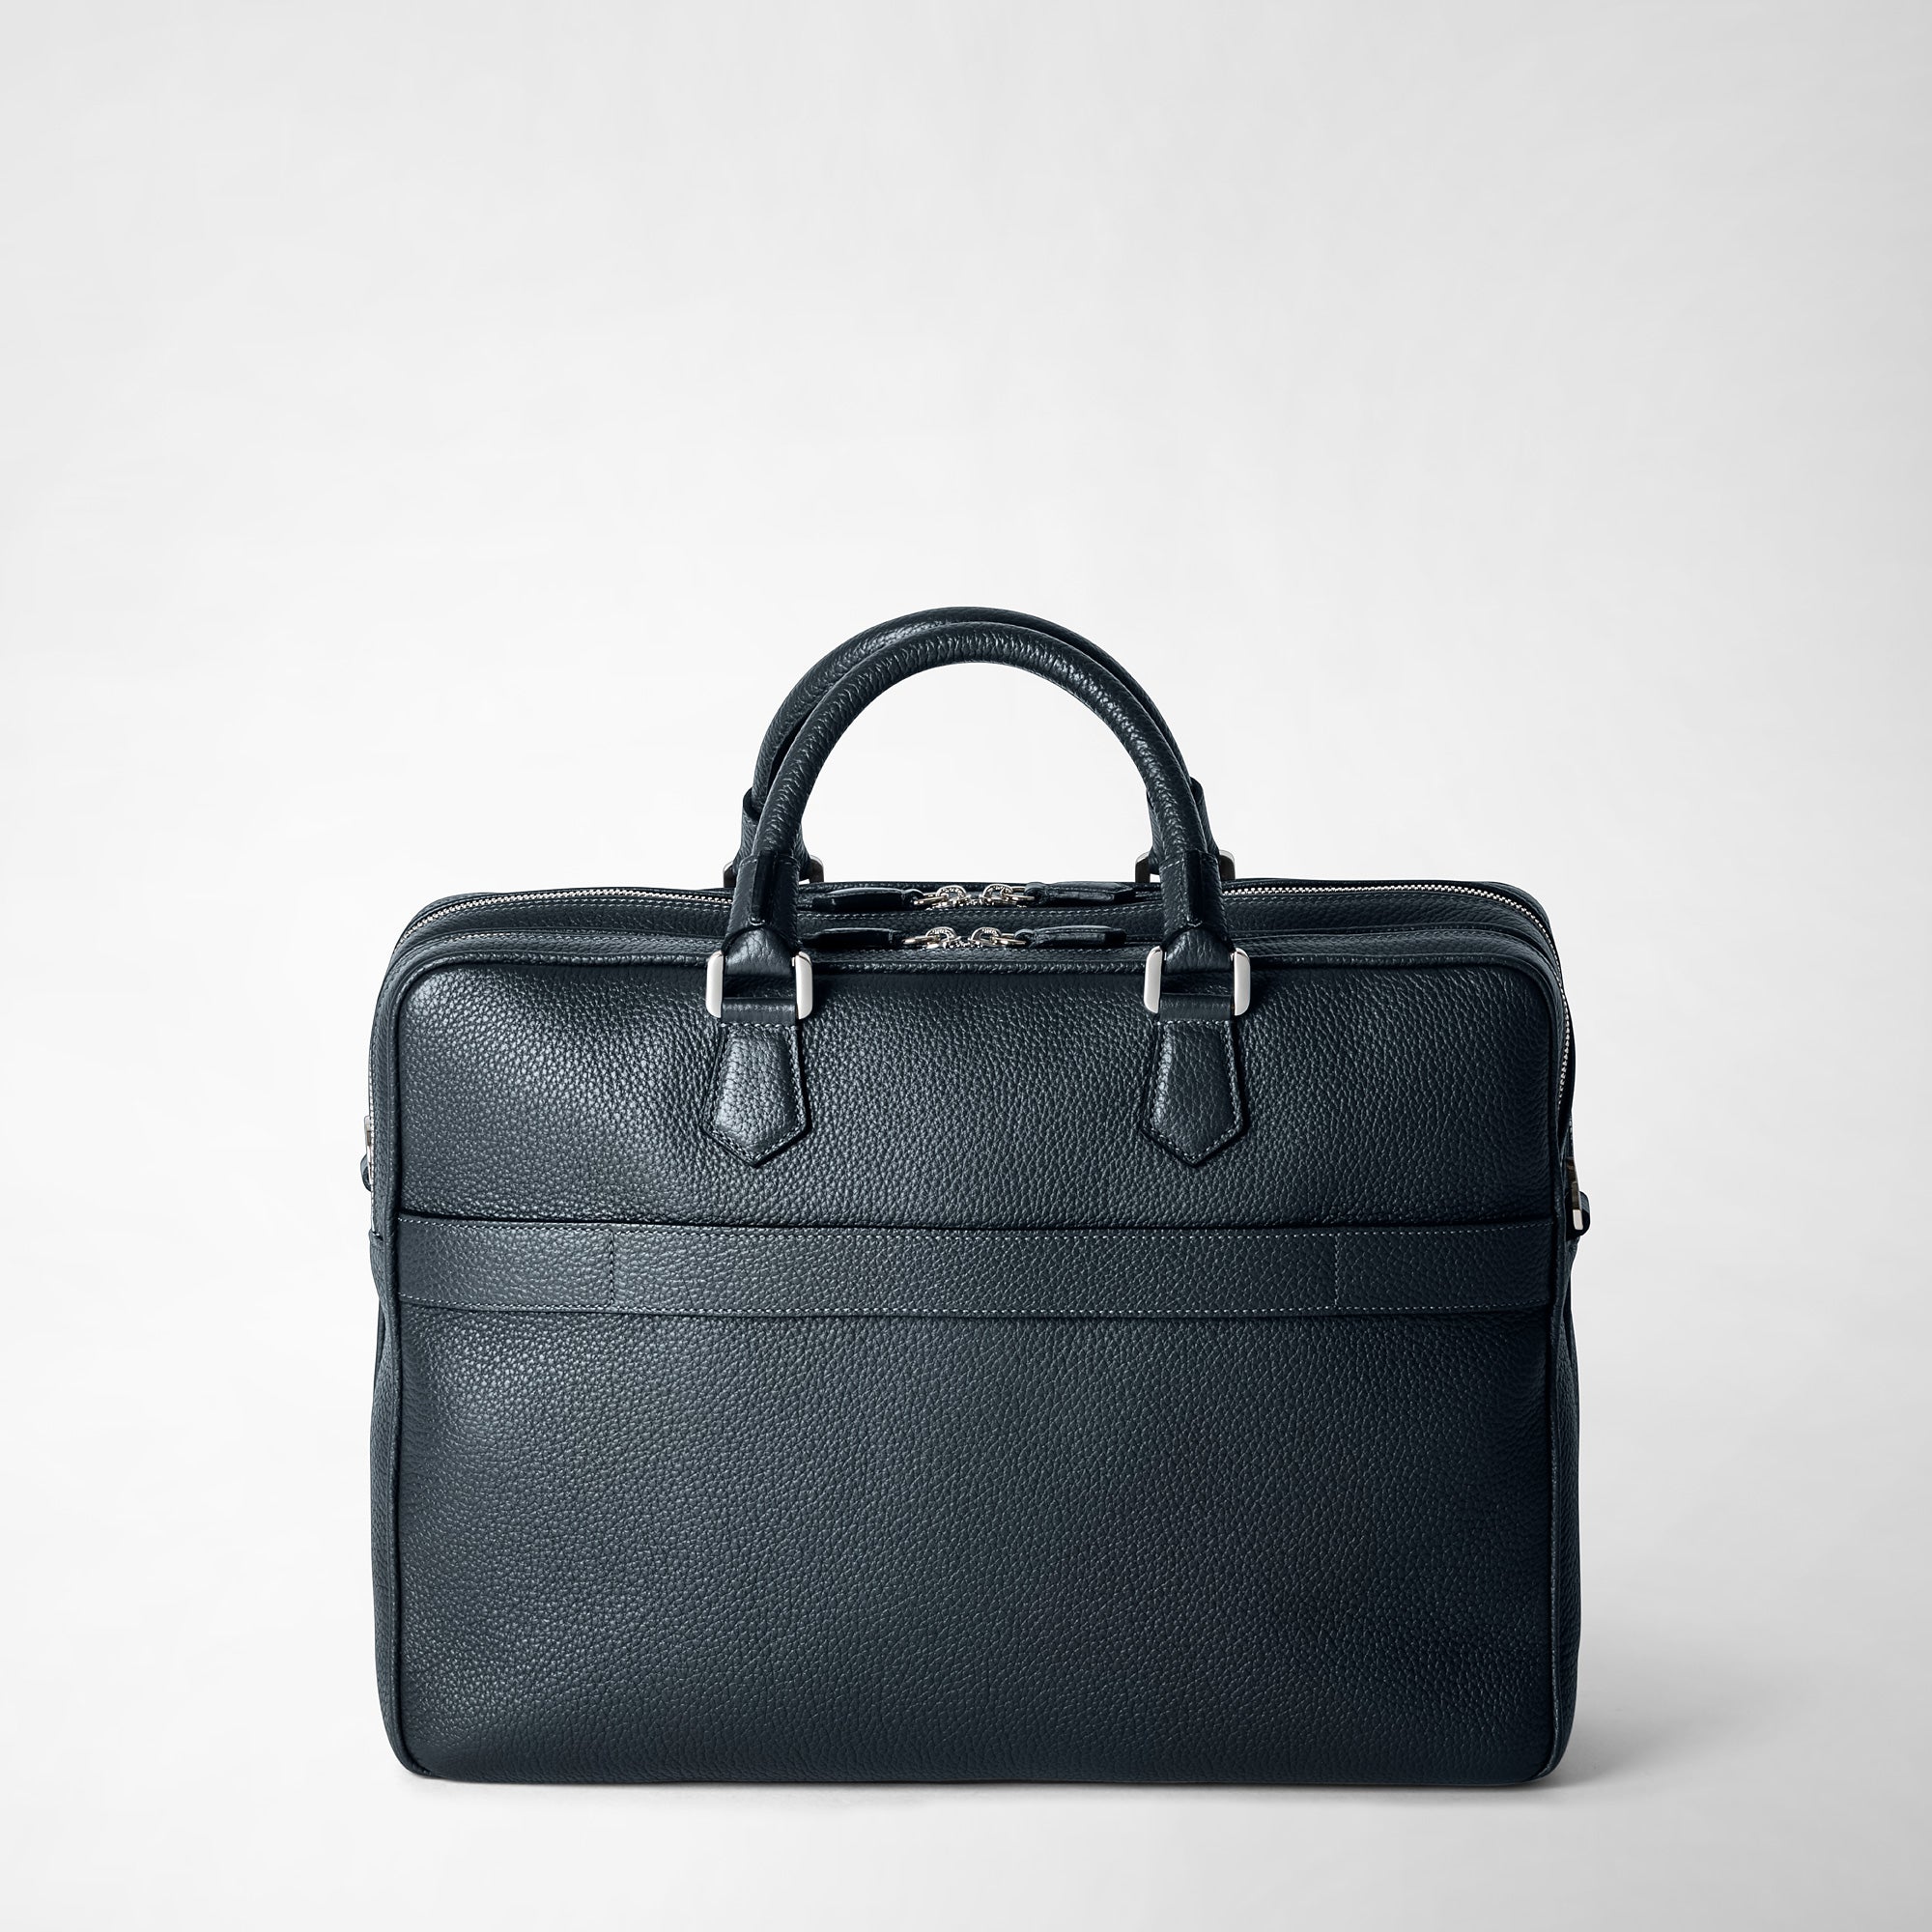 LARGE BRIEFCASE IN CACHEMIRE LEATHER